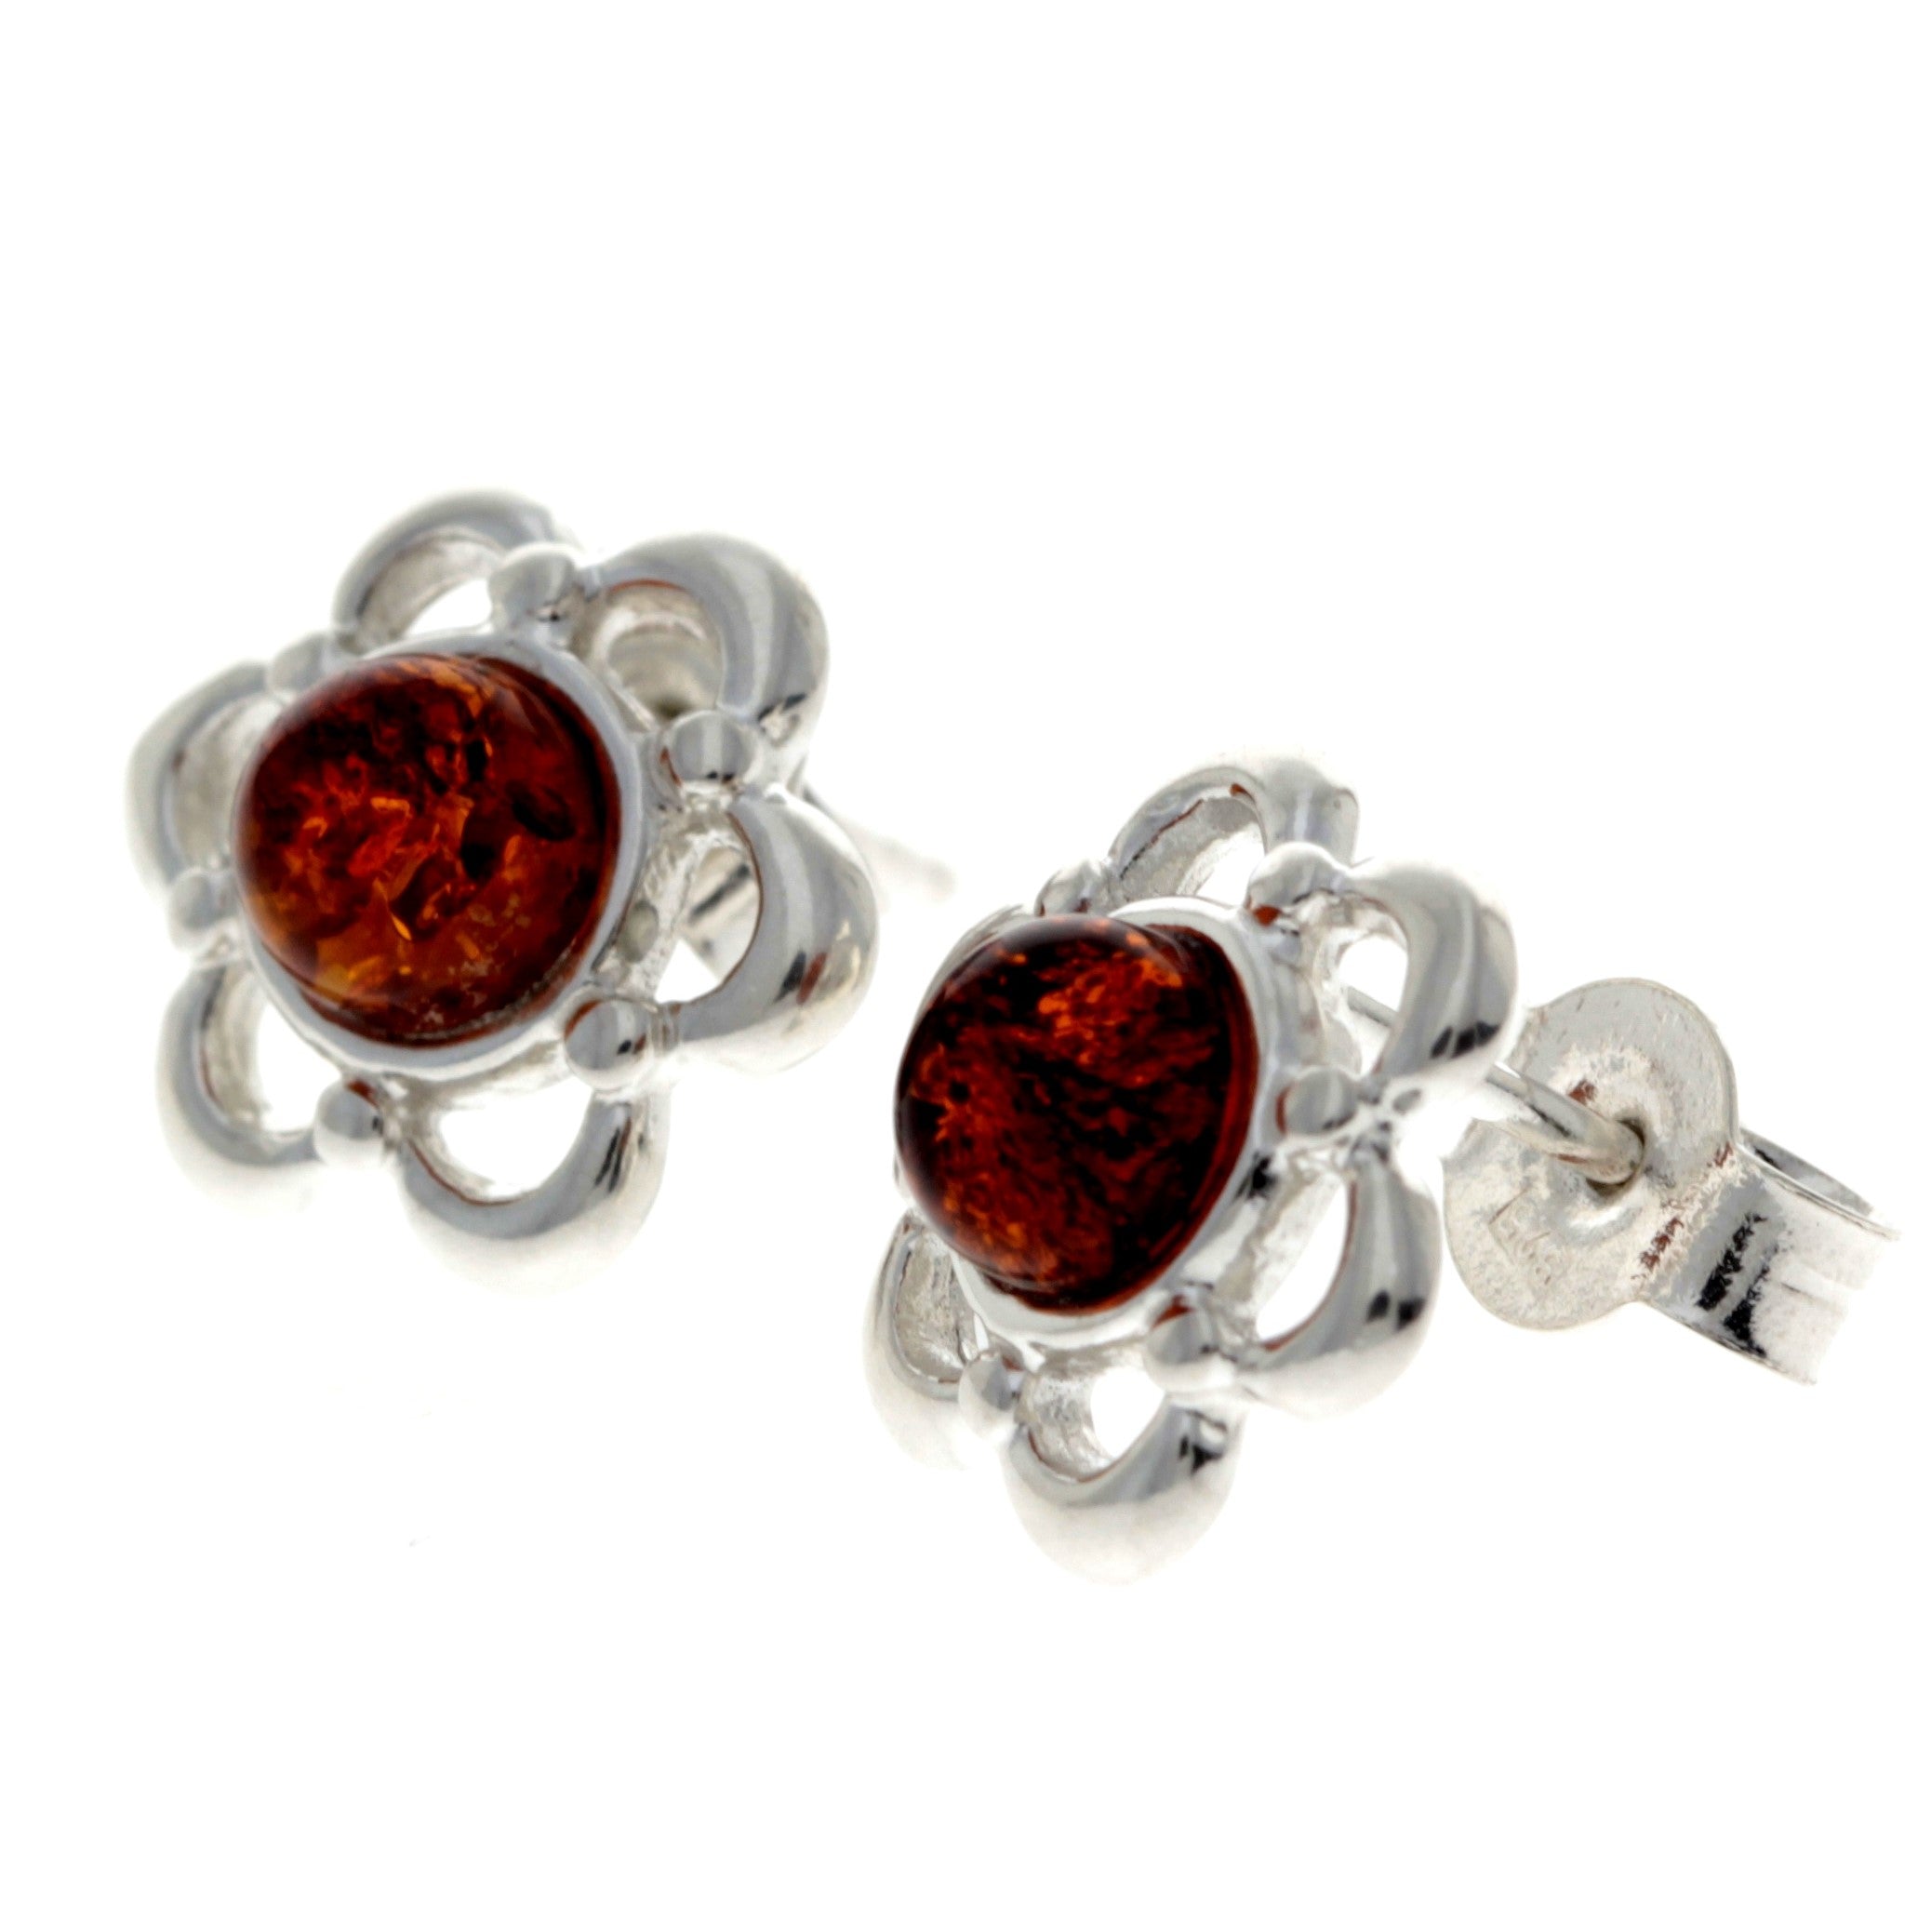 925 Sterling Silver & Genuine Baltic Amber Classic Flowers Studs Earrings - 8013